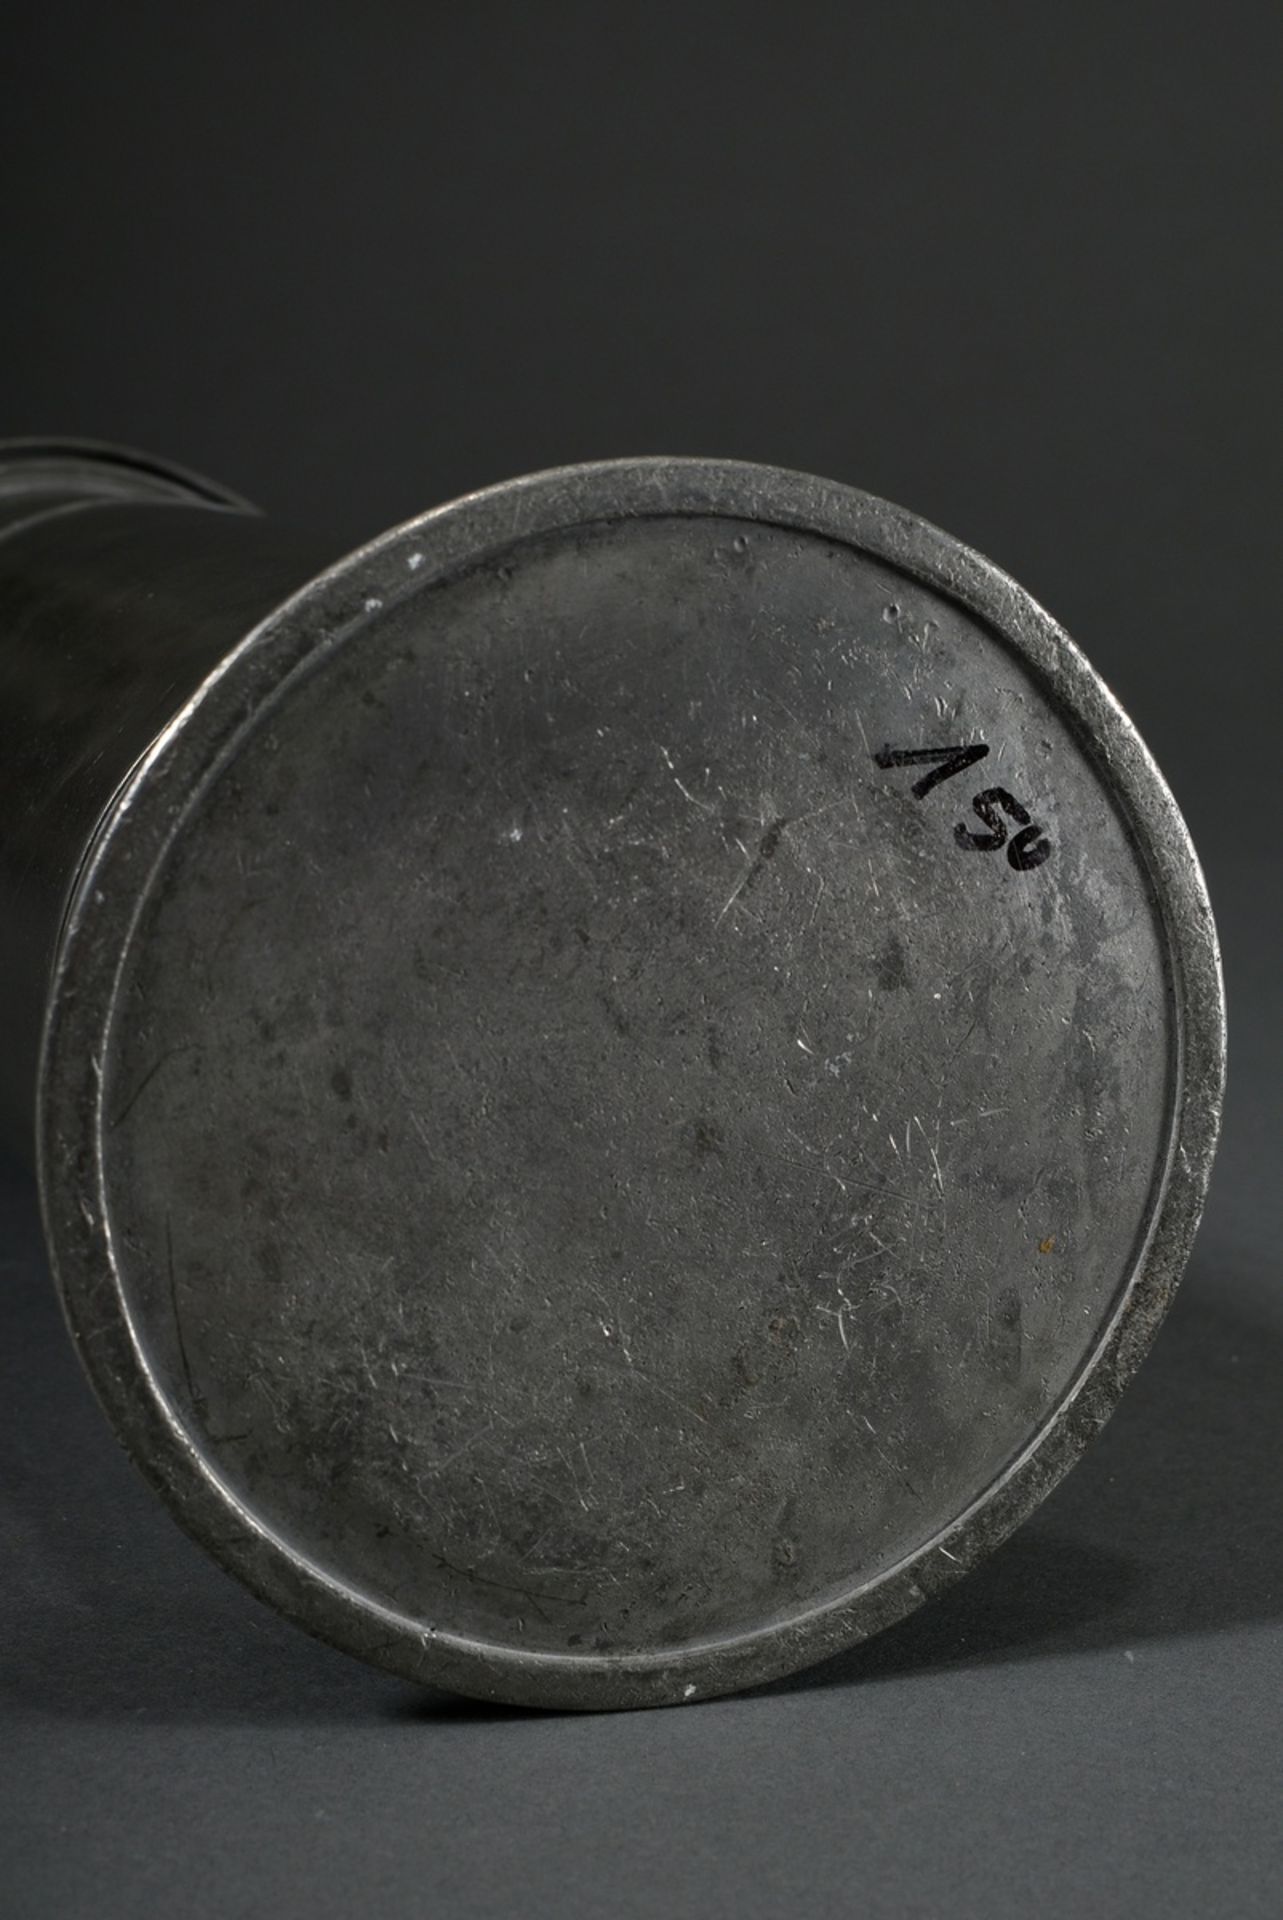 Tall pewter lidded tankard with floral engraved decoration and owner's inscription "Asmus Hinrich M - Image 8 of 8